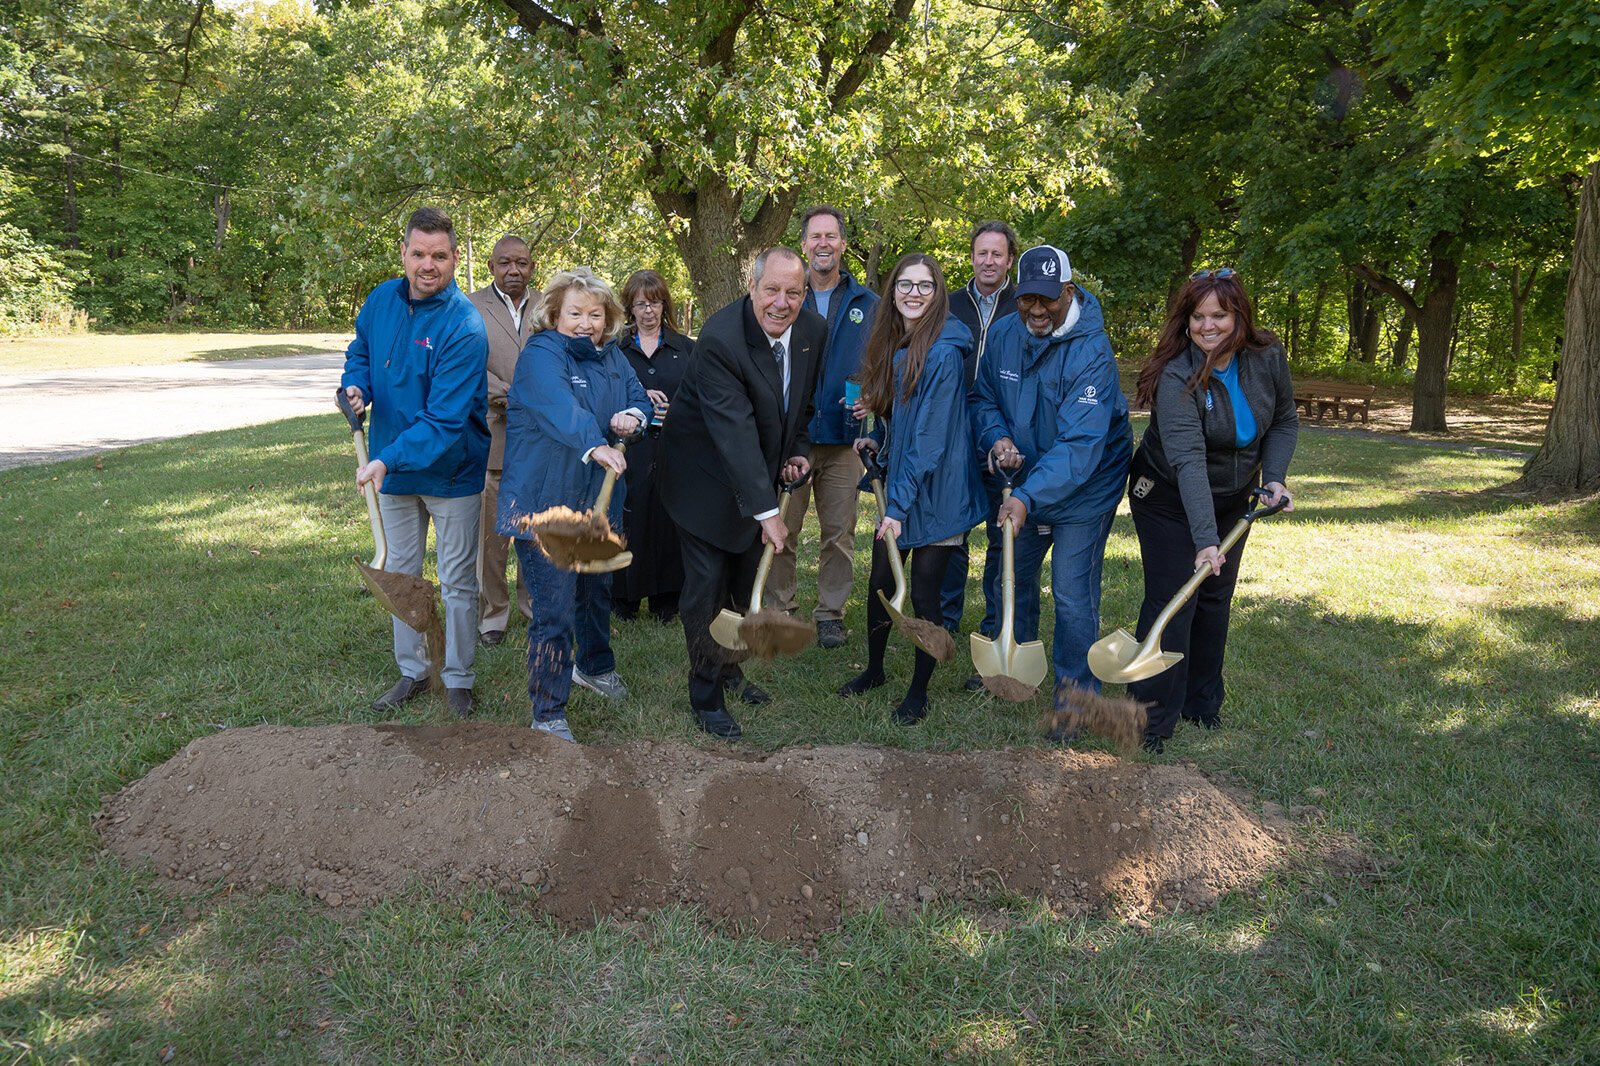 A groundbreaking event for the new trail segment connecting the B2B Trail to the Van Buren Park trail system.